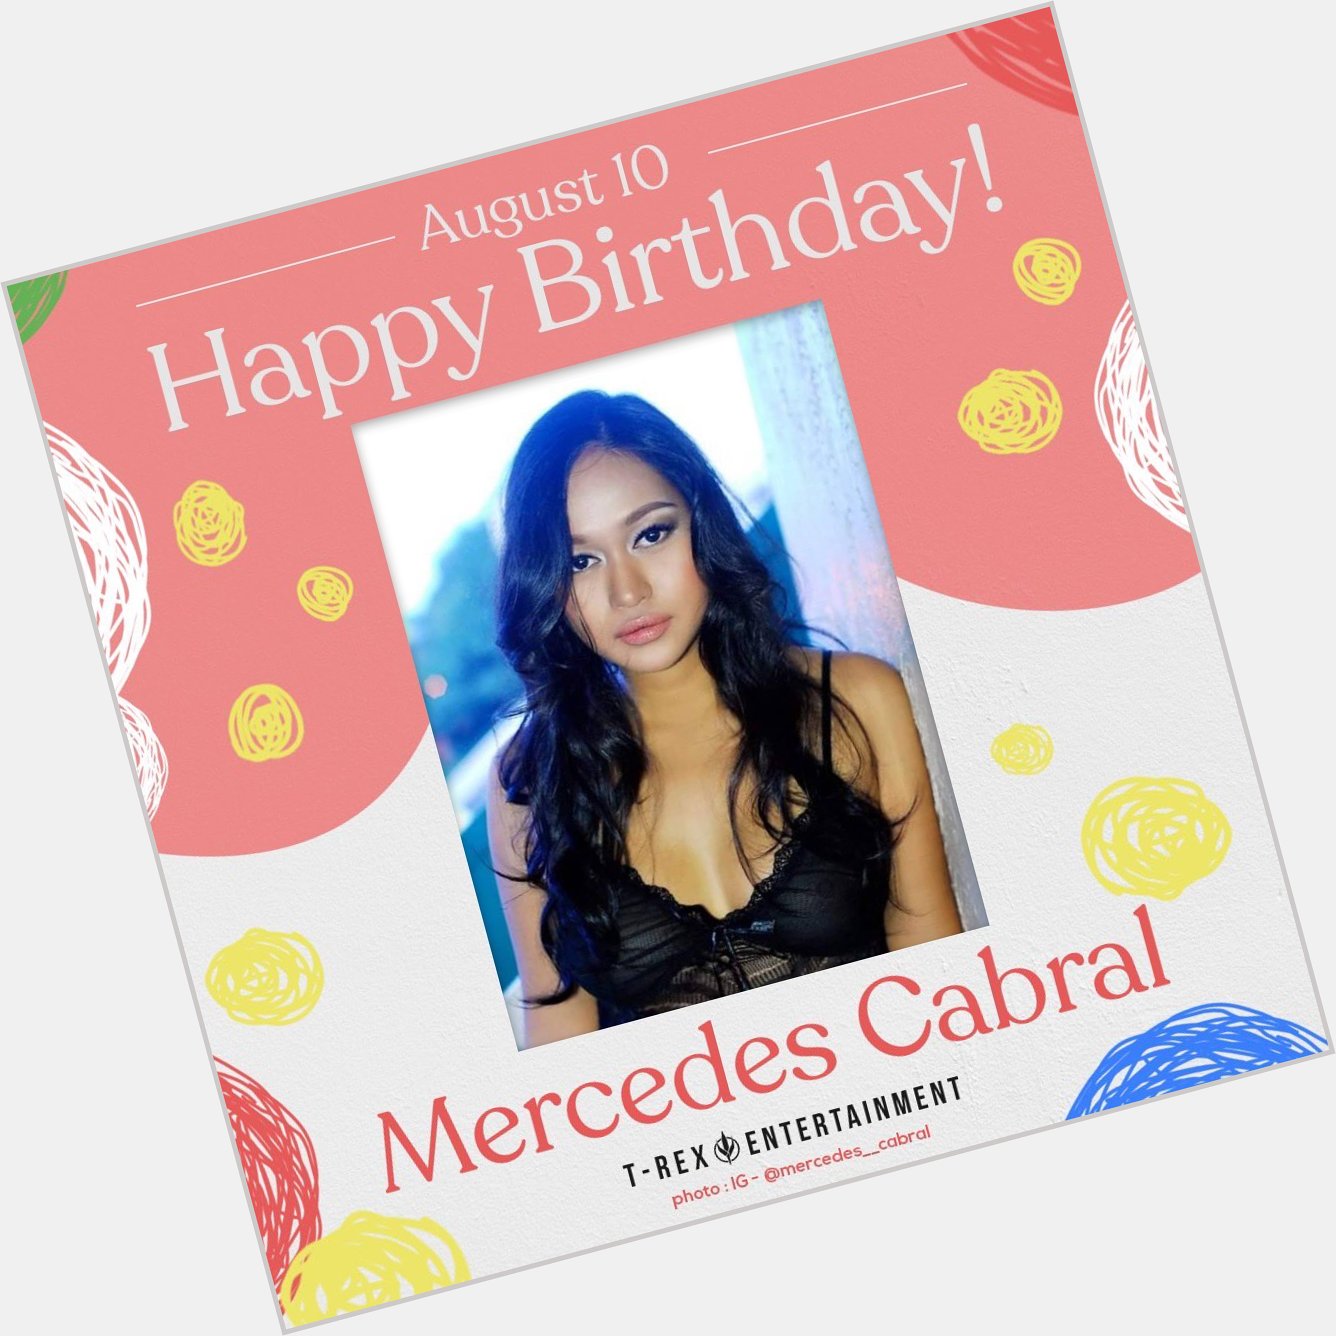 Happy 34th birthday, Mercedes Cabral!

More blessings to come! 